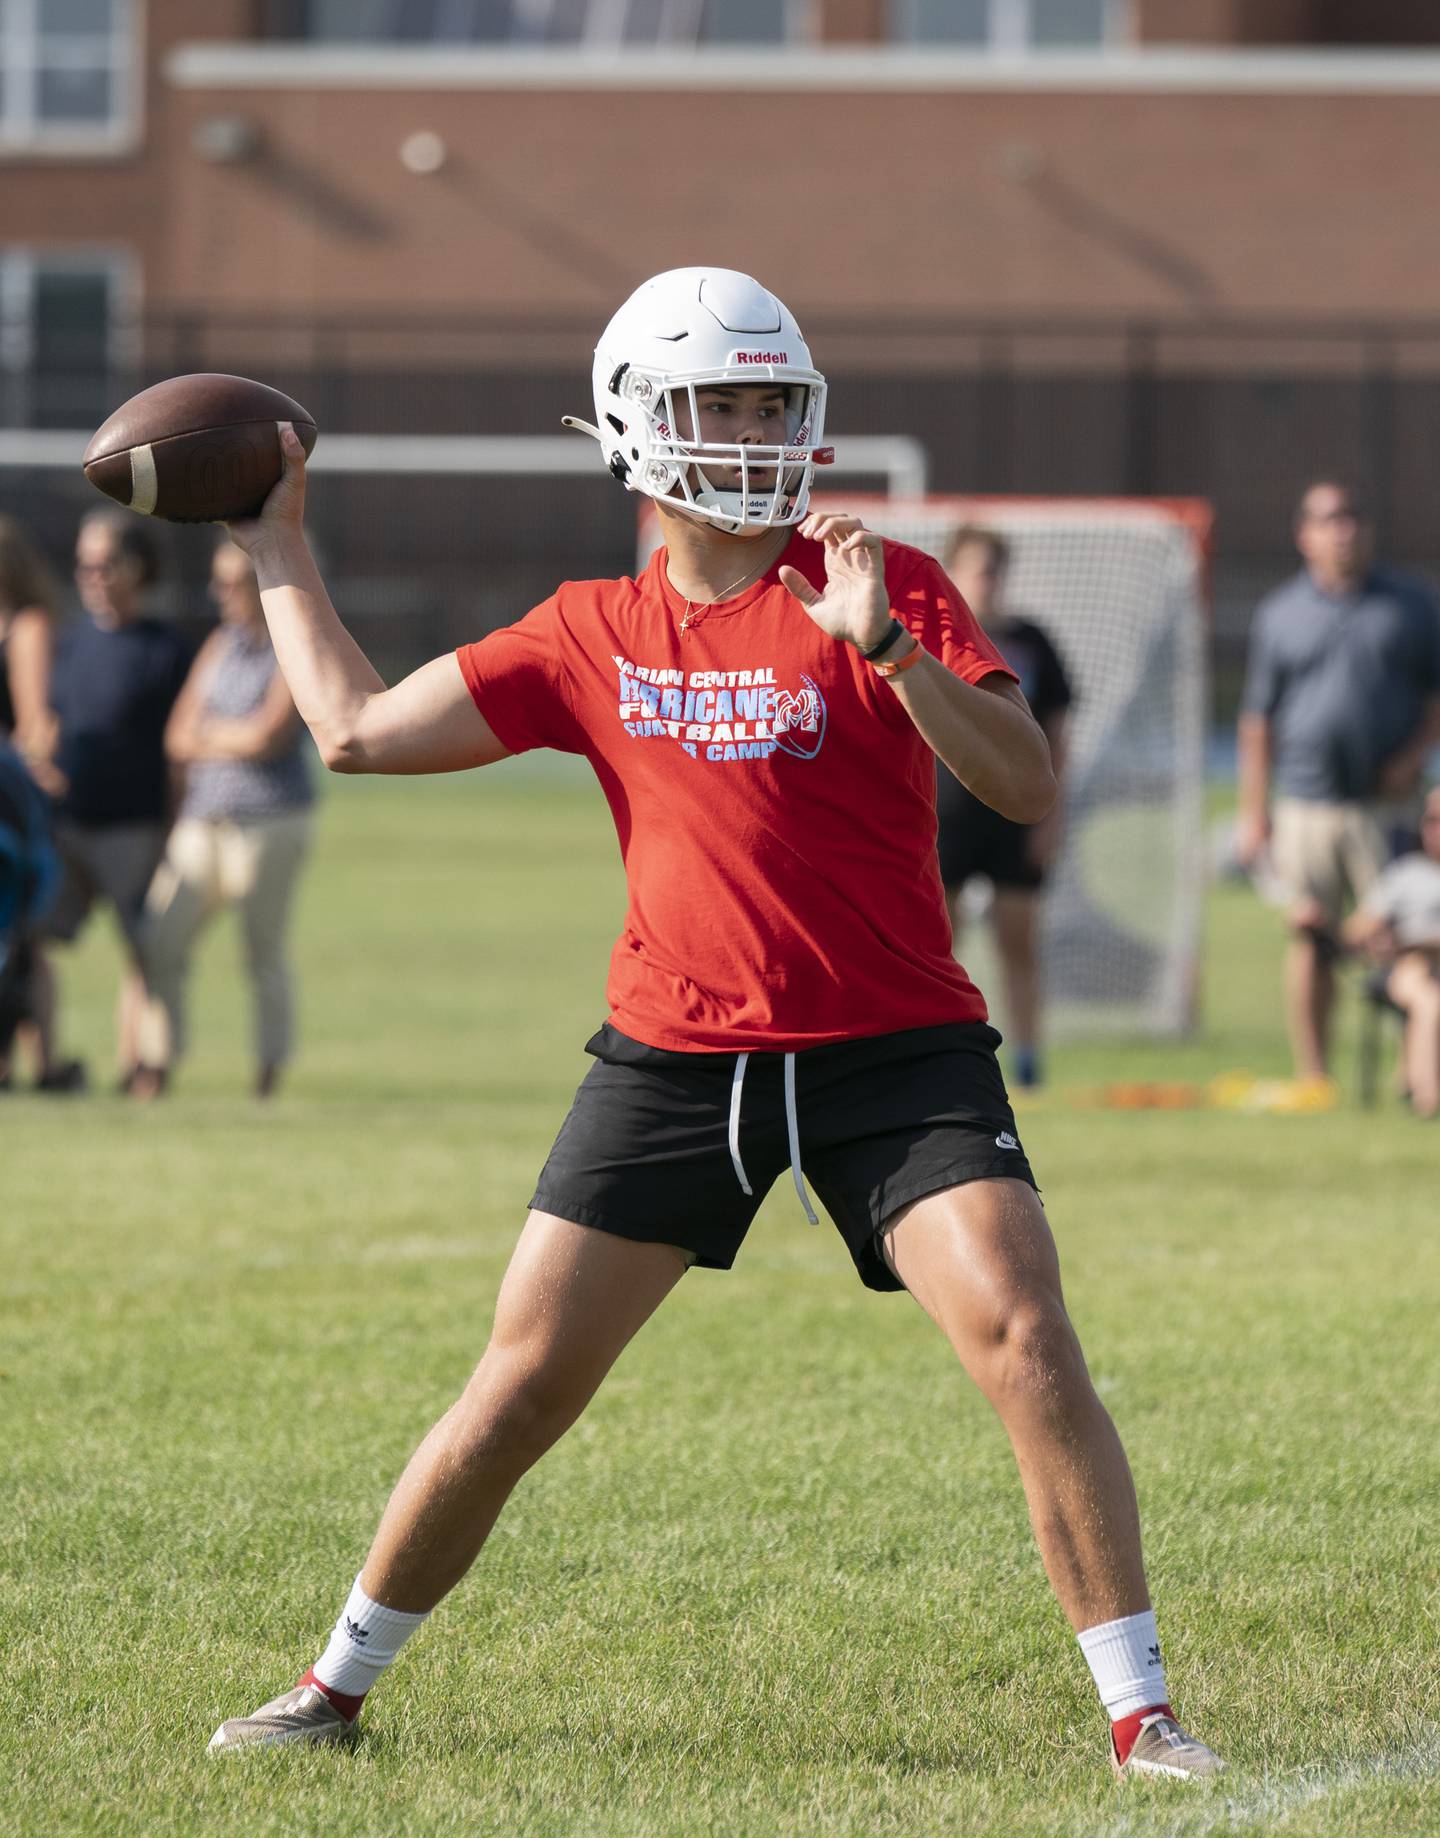 Marian Central quarterback Cale McThenia during a 7 on 7 football practice held on Thursday, July 21, 2022 at Crystal Lake Central High School. Ryan Rayburn for Shaw Local